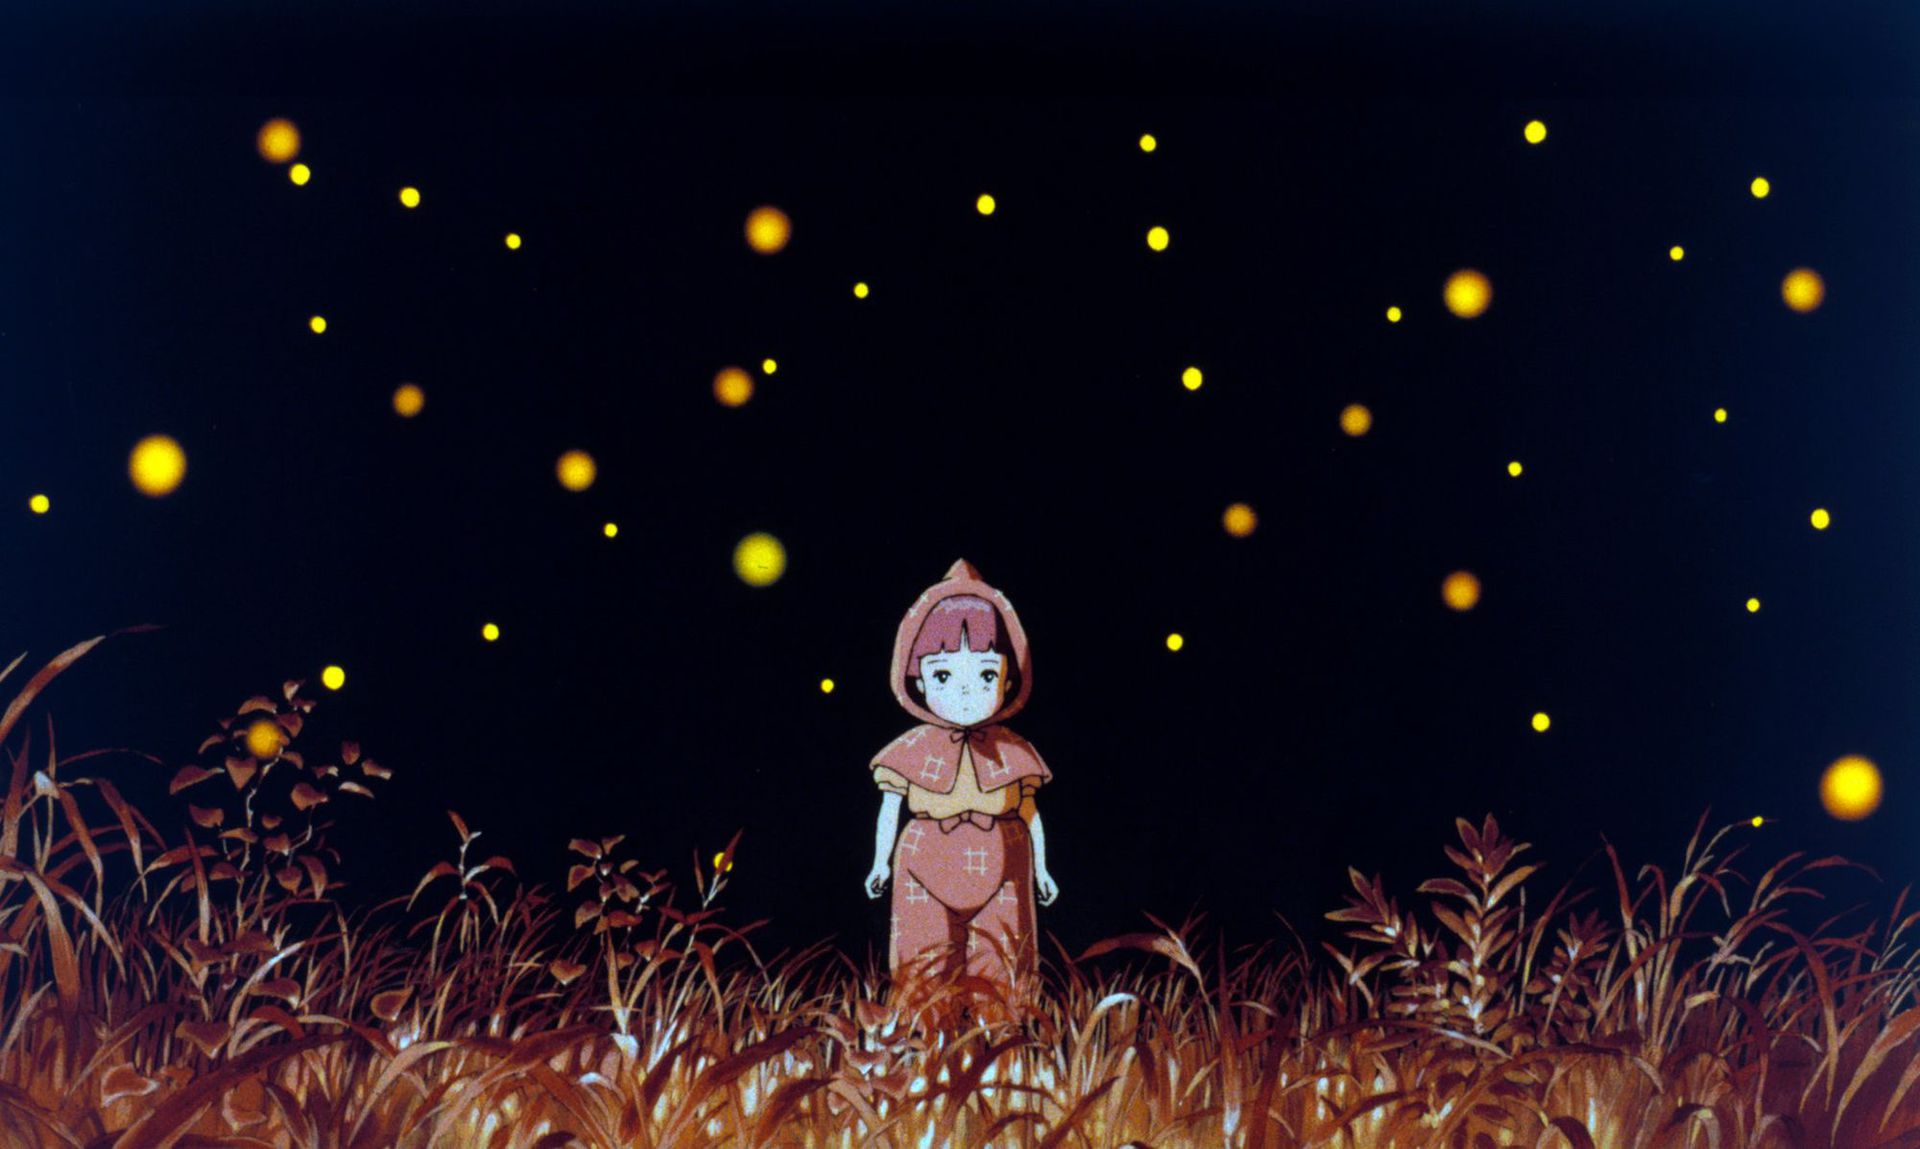 HBO Max: Why Grave of the Fireflies Is Missing from Its Studio Ghibli  Library